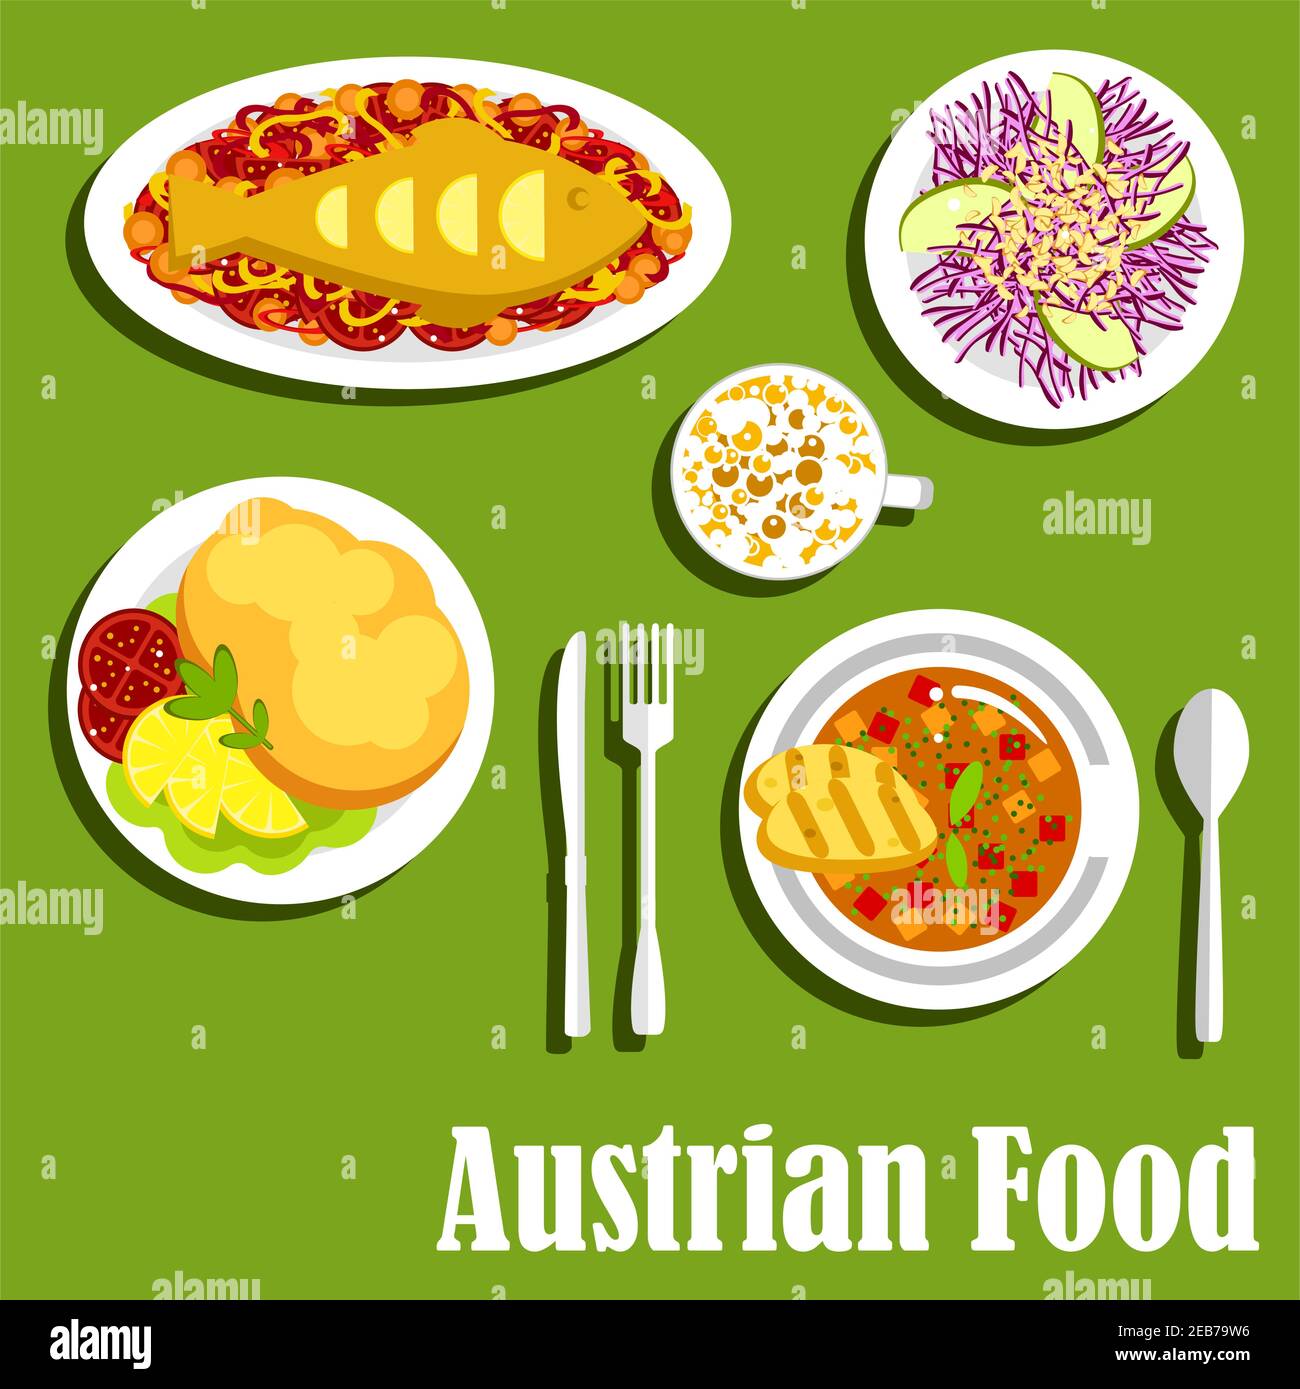 Viennese popular dishes of austrian cuisine with fish and vegetables, fluffy egg souffle, red cabbage salad with apples, goulash soup with bread and c Stock Vector